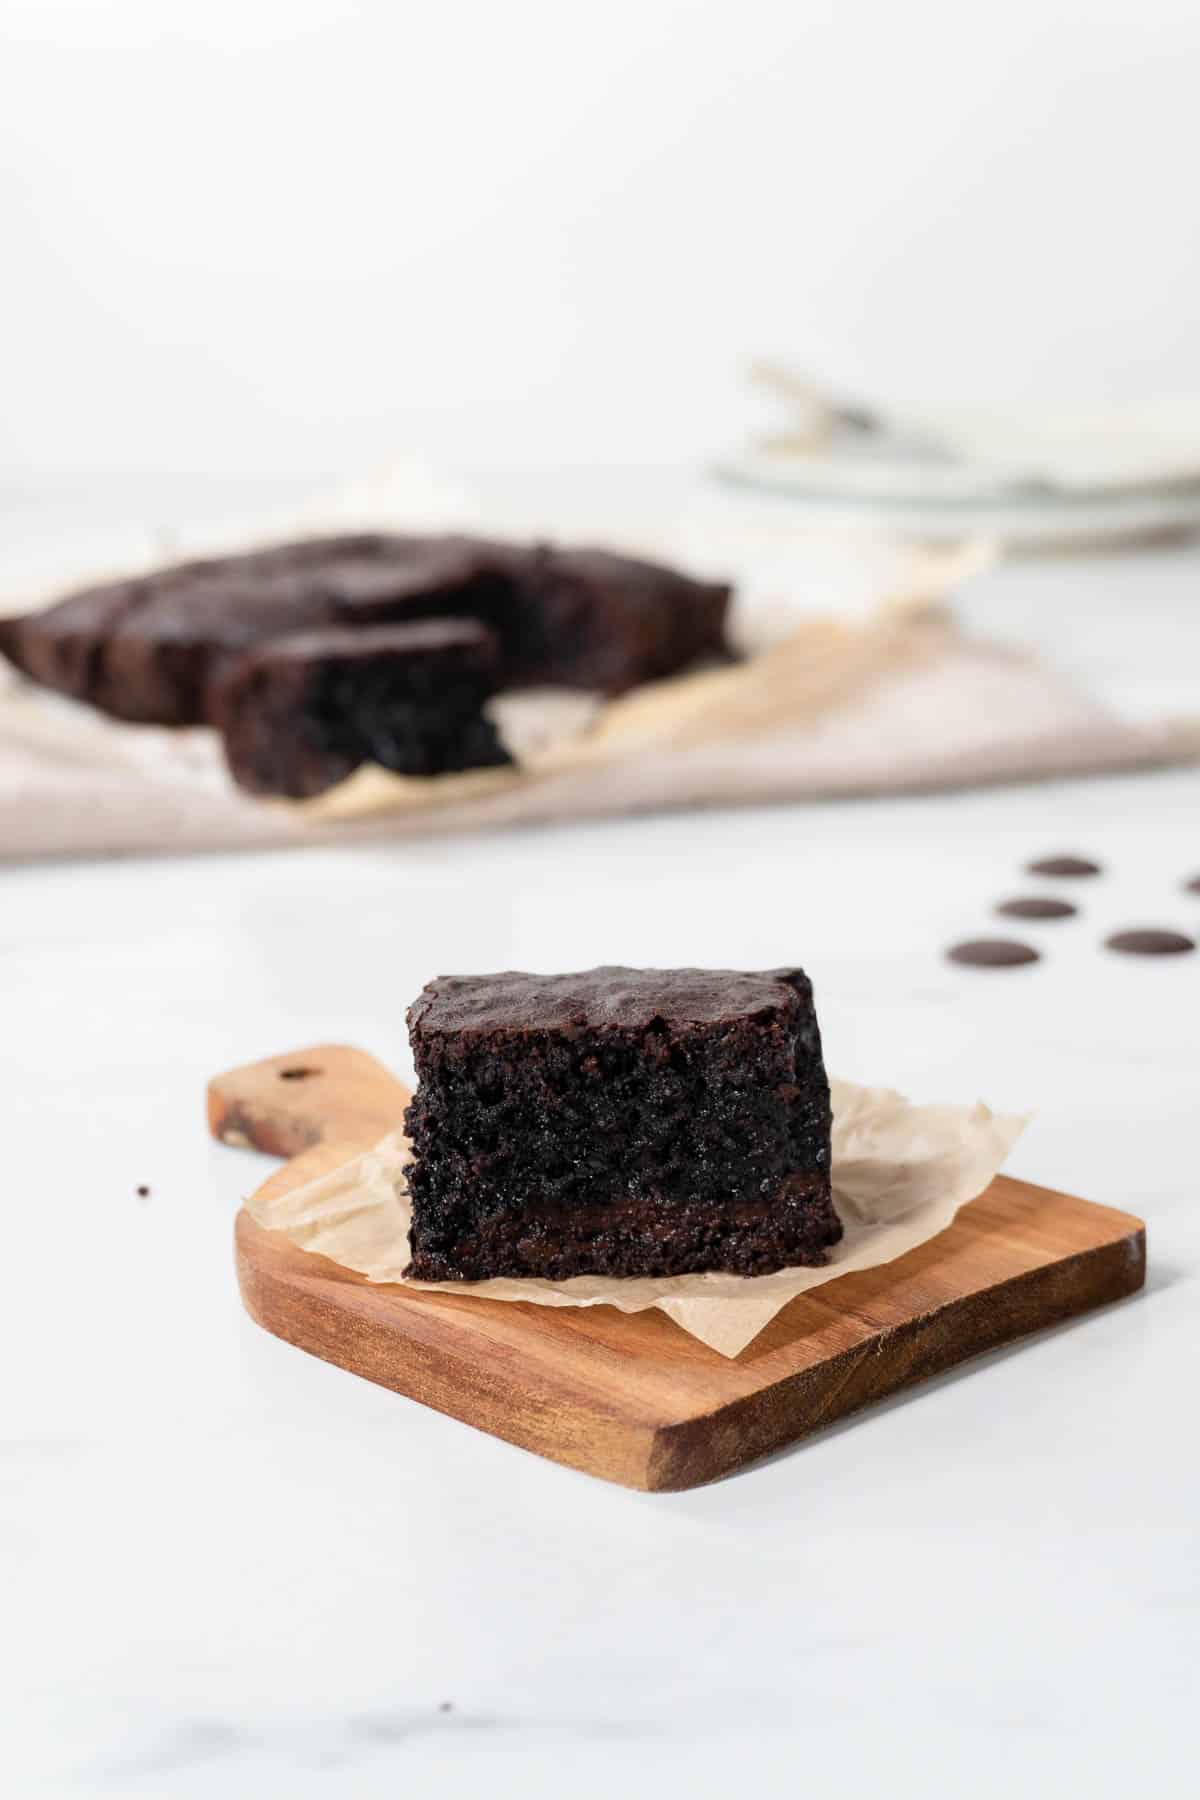 A single olive oil brownie on a wooden board.